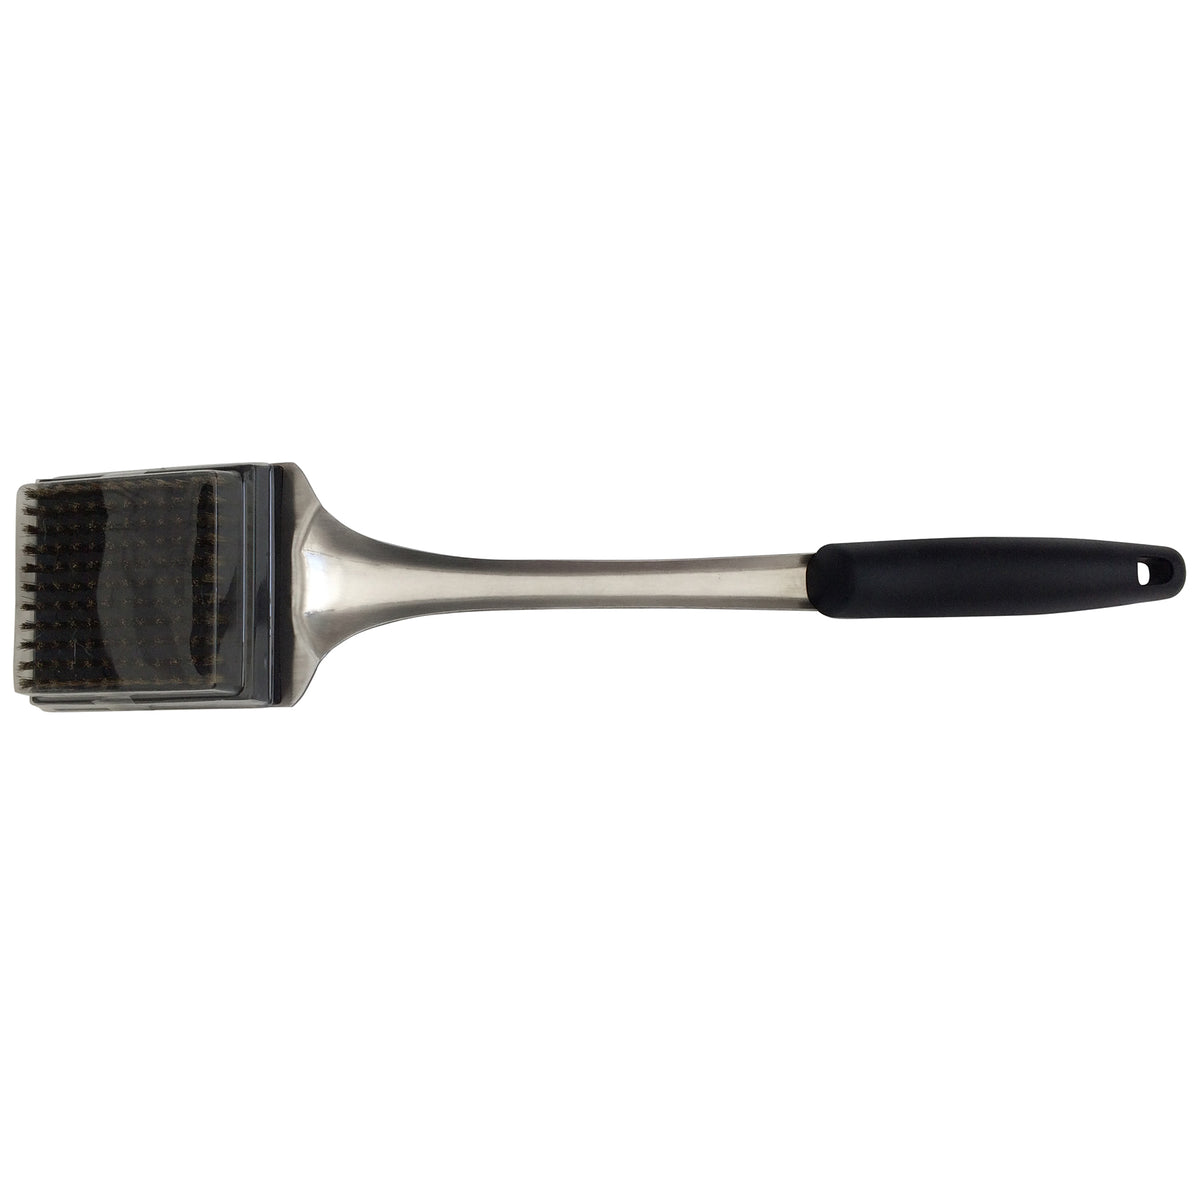 Grillstream Gourmet Barbecue Cleaning Brush